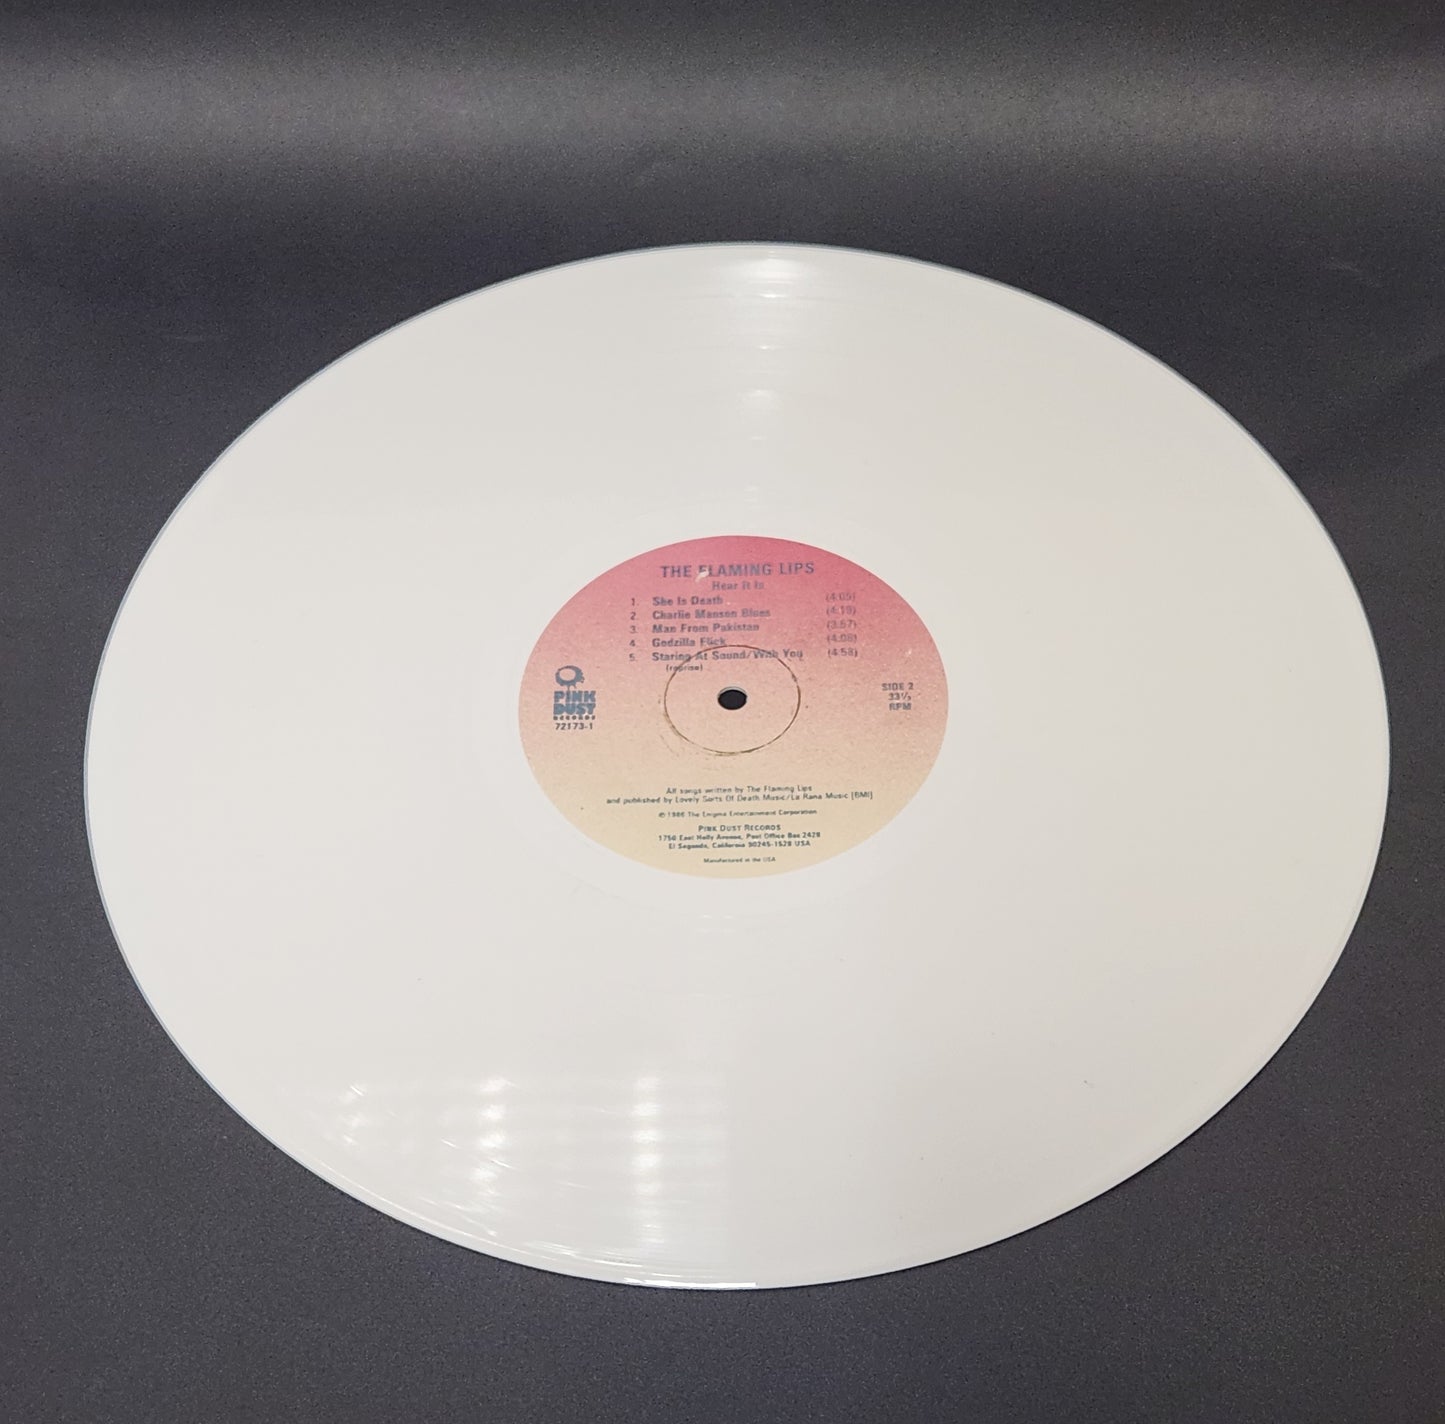 The Flaming Lips "Hear It Is" 1986 Limited Ed. White Vinyl Indie Rock Record Album